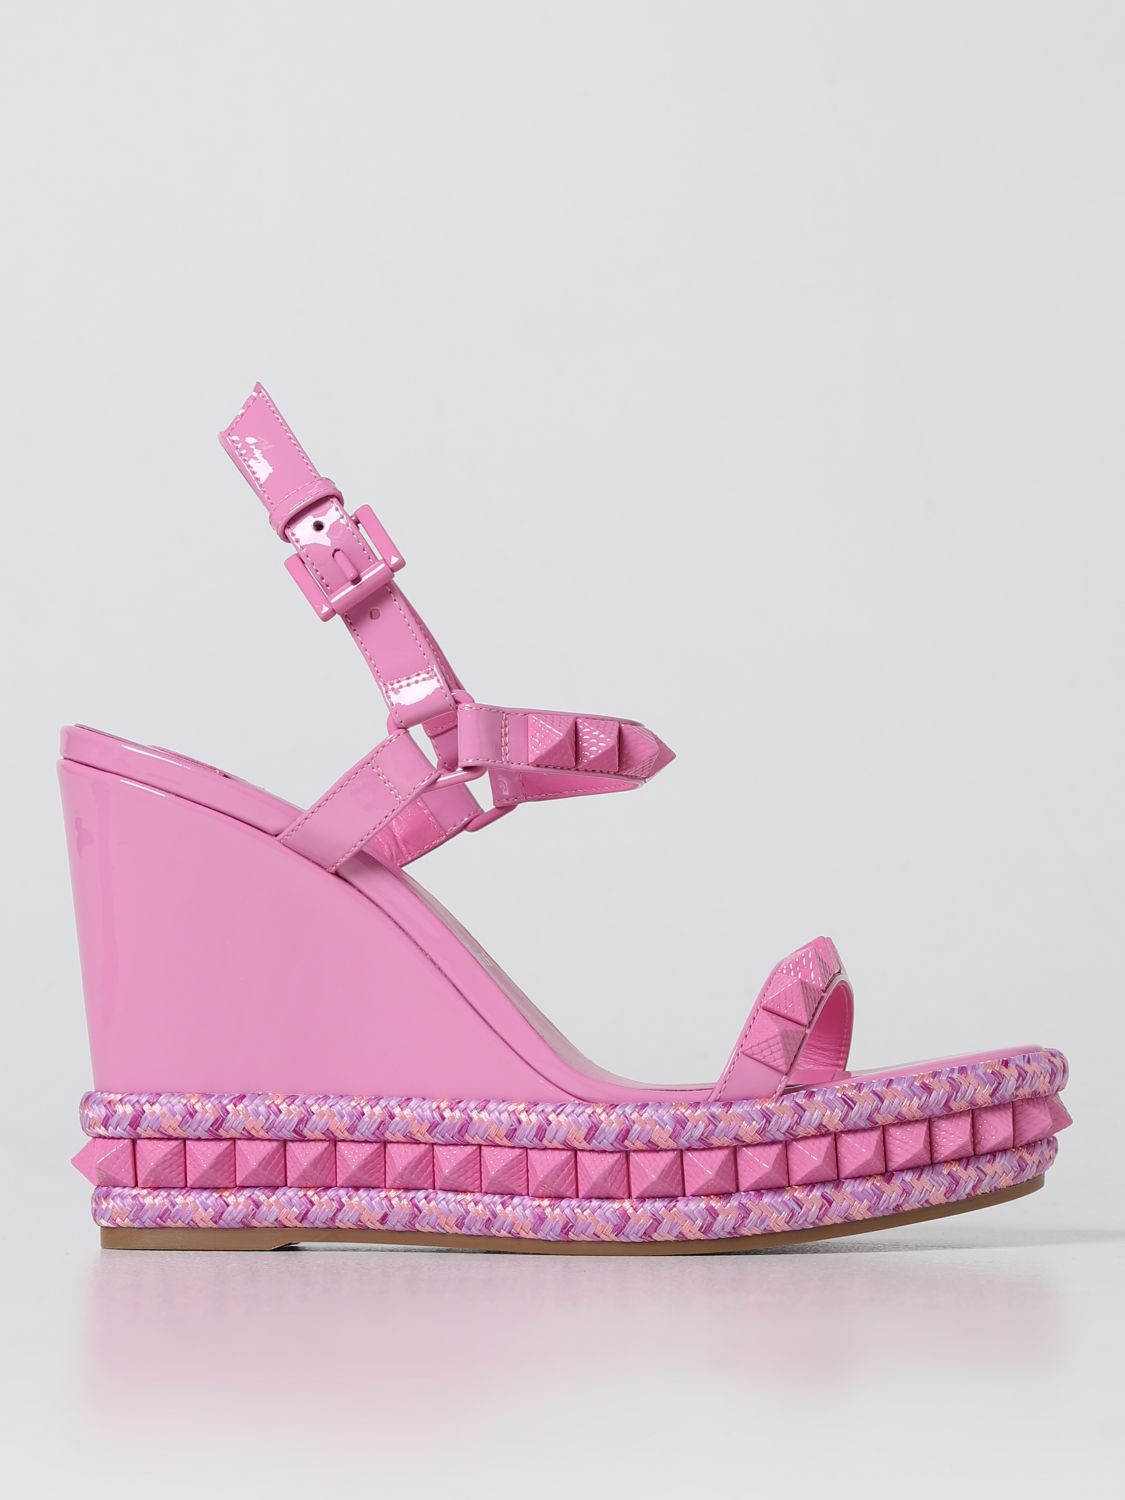 CHRISTIAN LOUBOUTIN: Pyraclou wedge in patent leather - Pink | Christian Louboutin wedge shoes at GIGLIO.COM